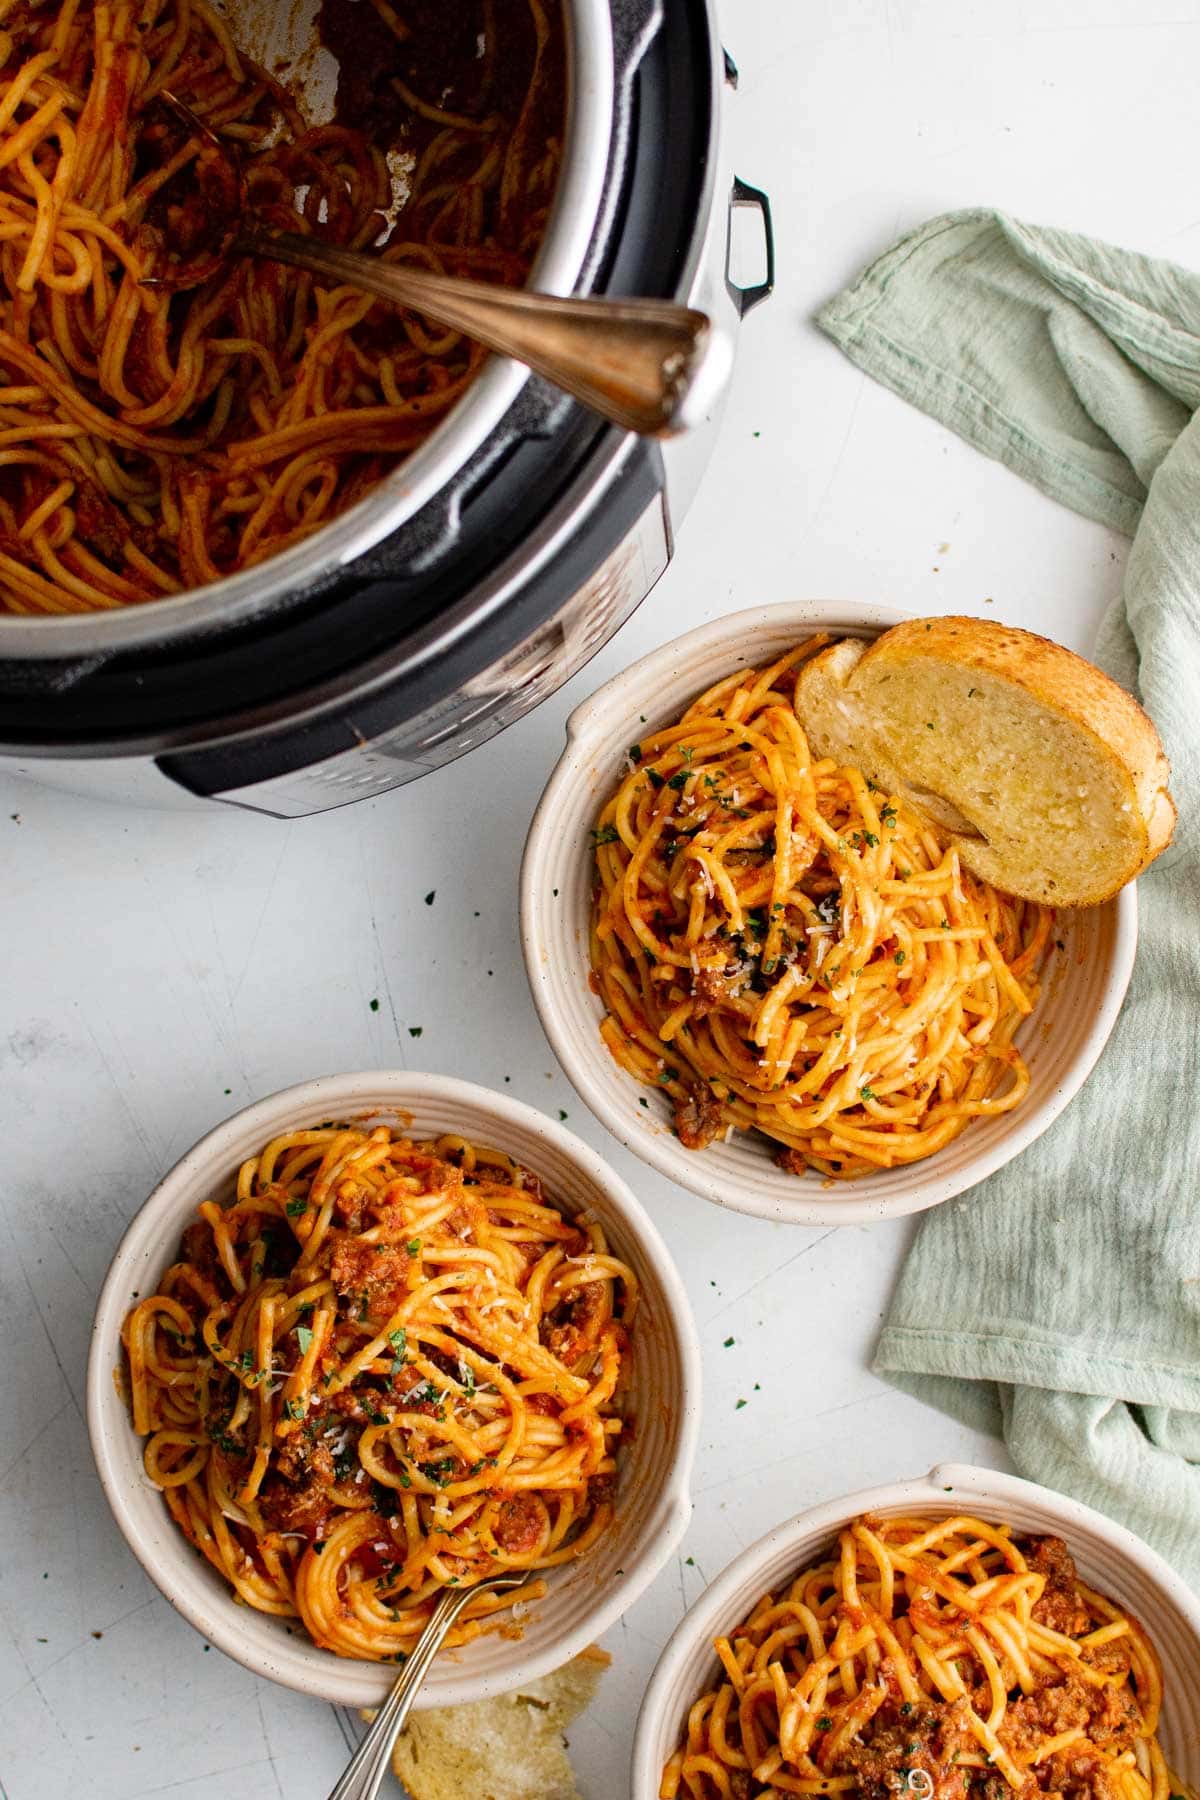 Bowls of spaghetti with meat sauce, bread and na instant pot.